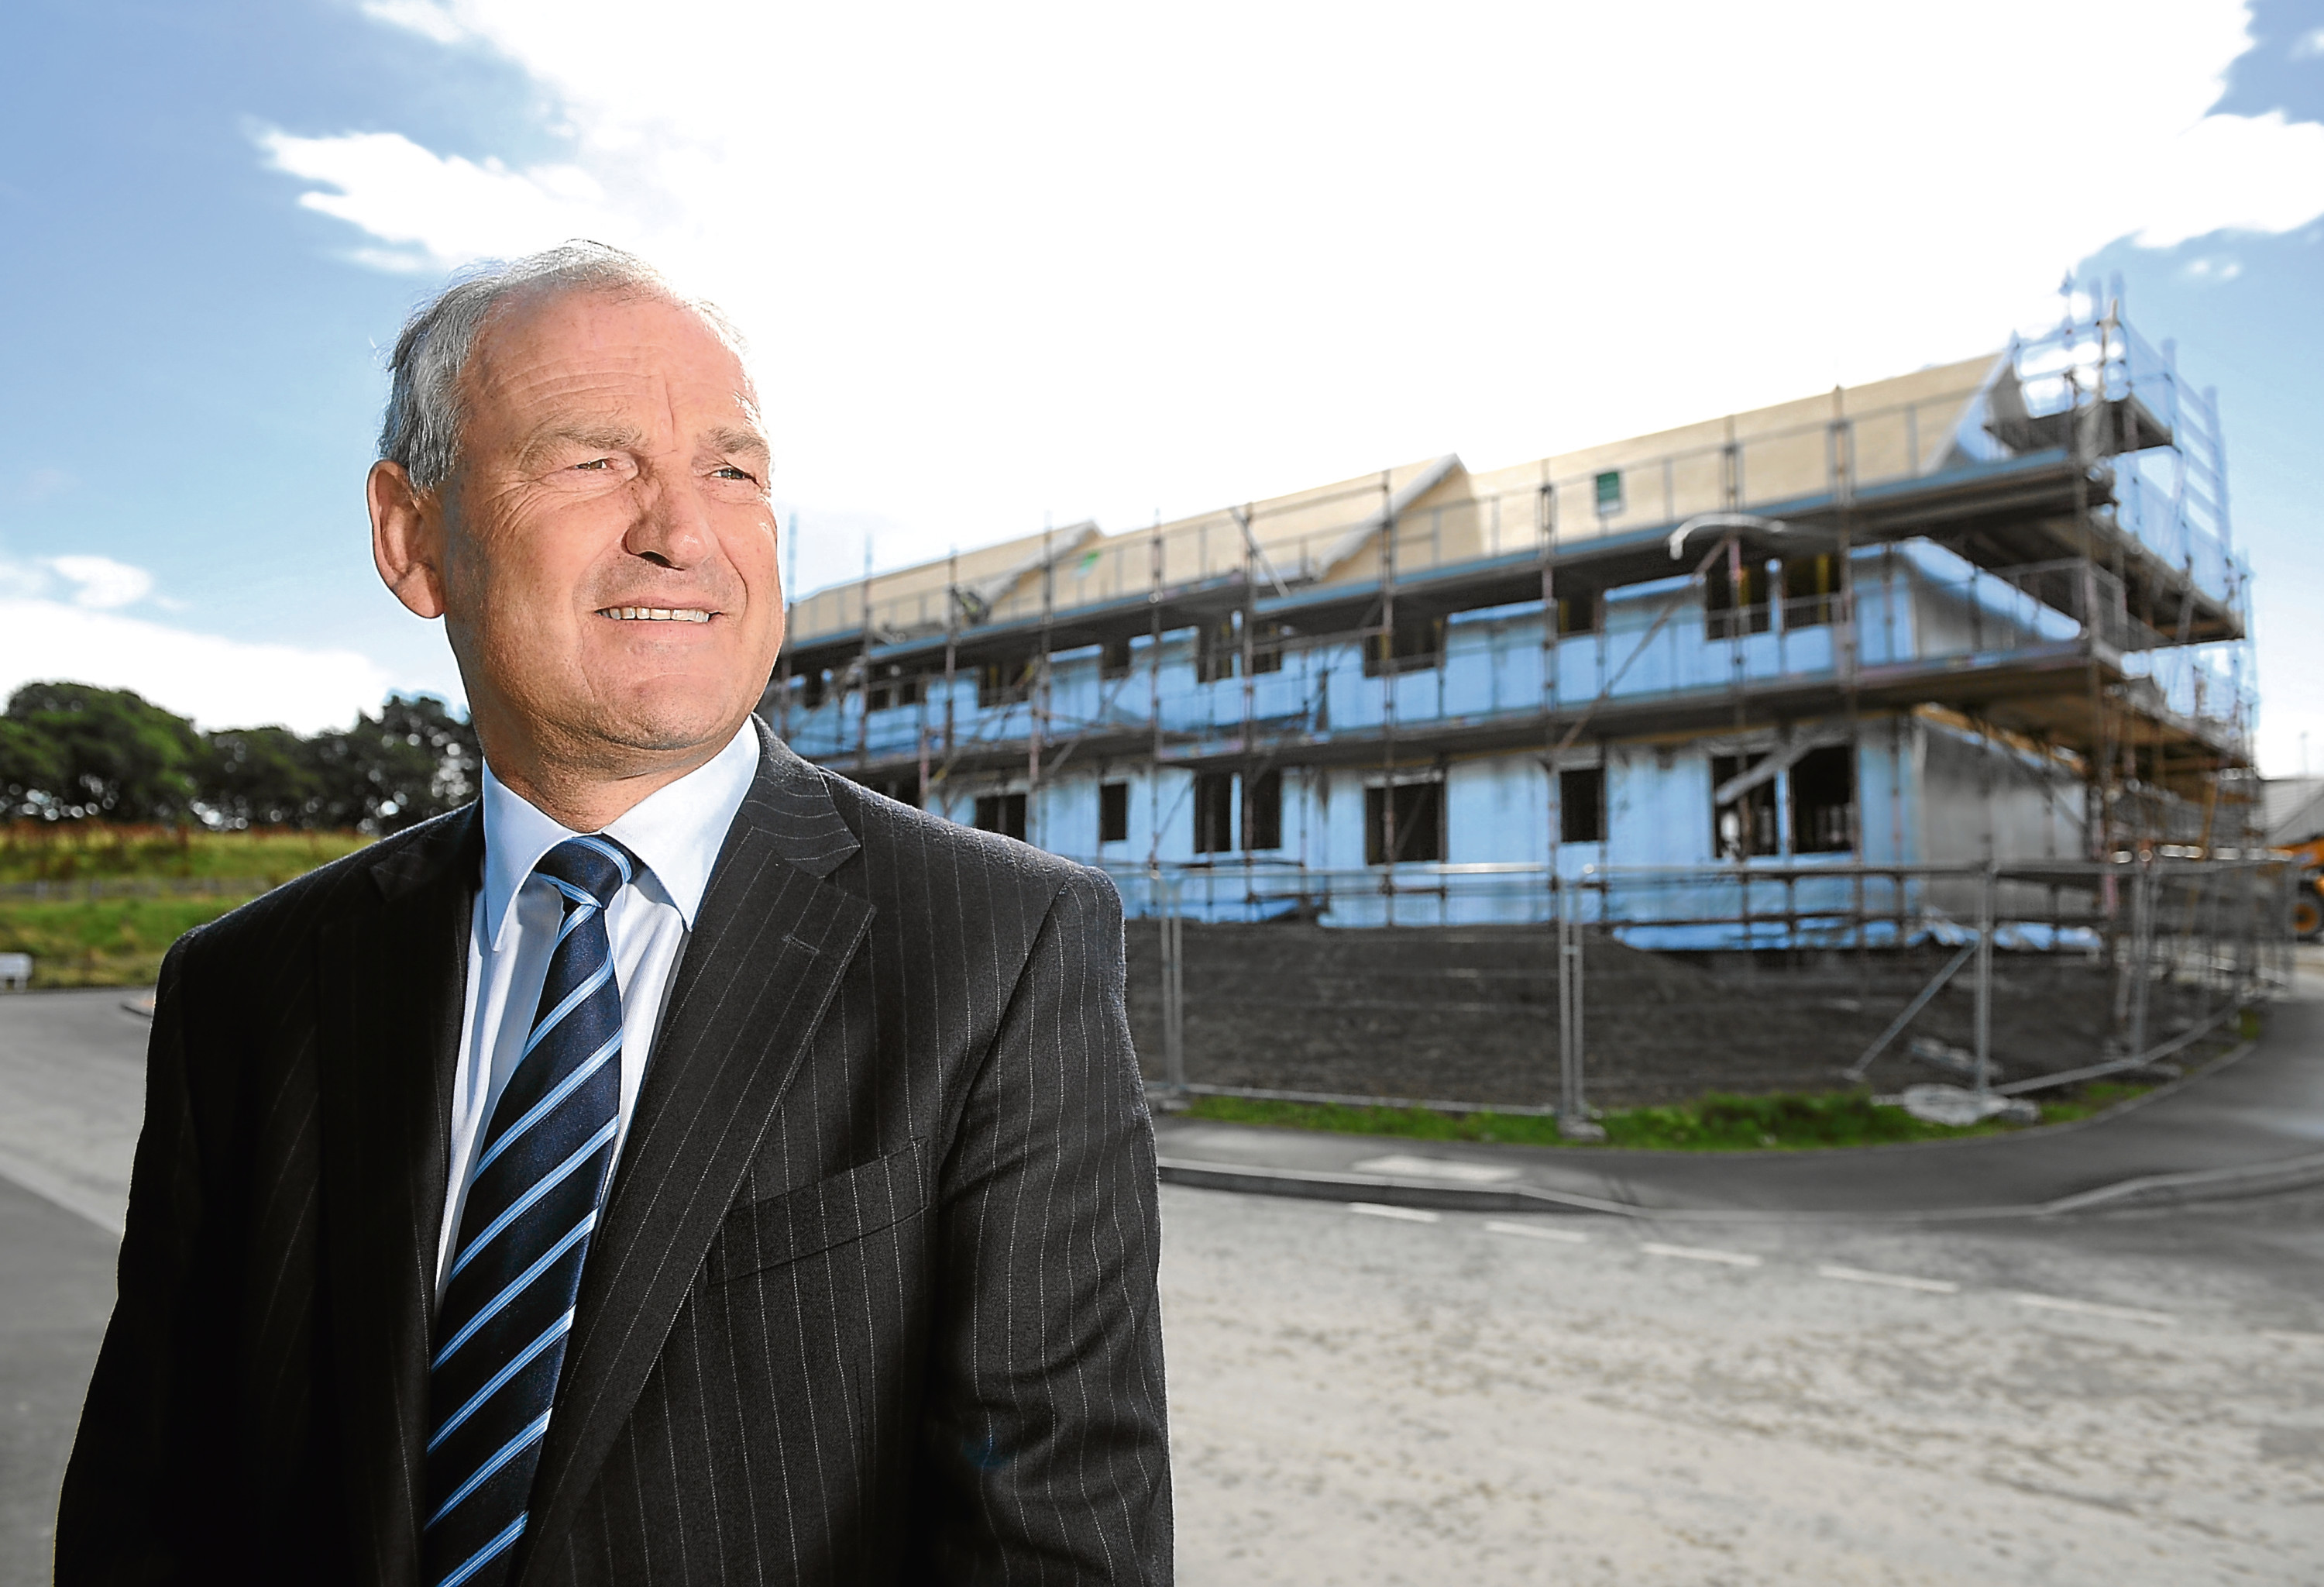 Photograph by Sandy McCook, Inverness 28th Aug '12

Pic for business.

George Fraser,Chief Executive of Tulloch at their new development at The Parks, Inverness.